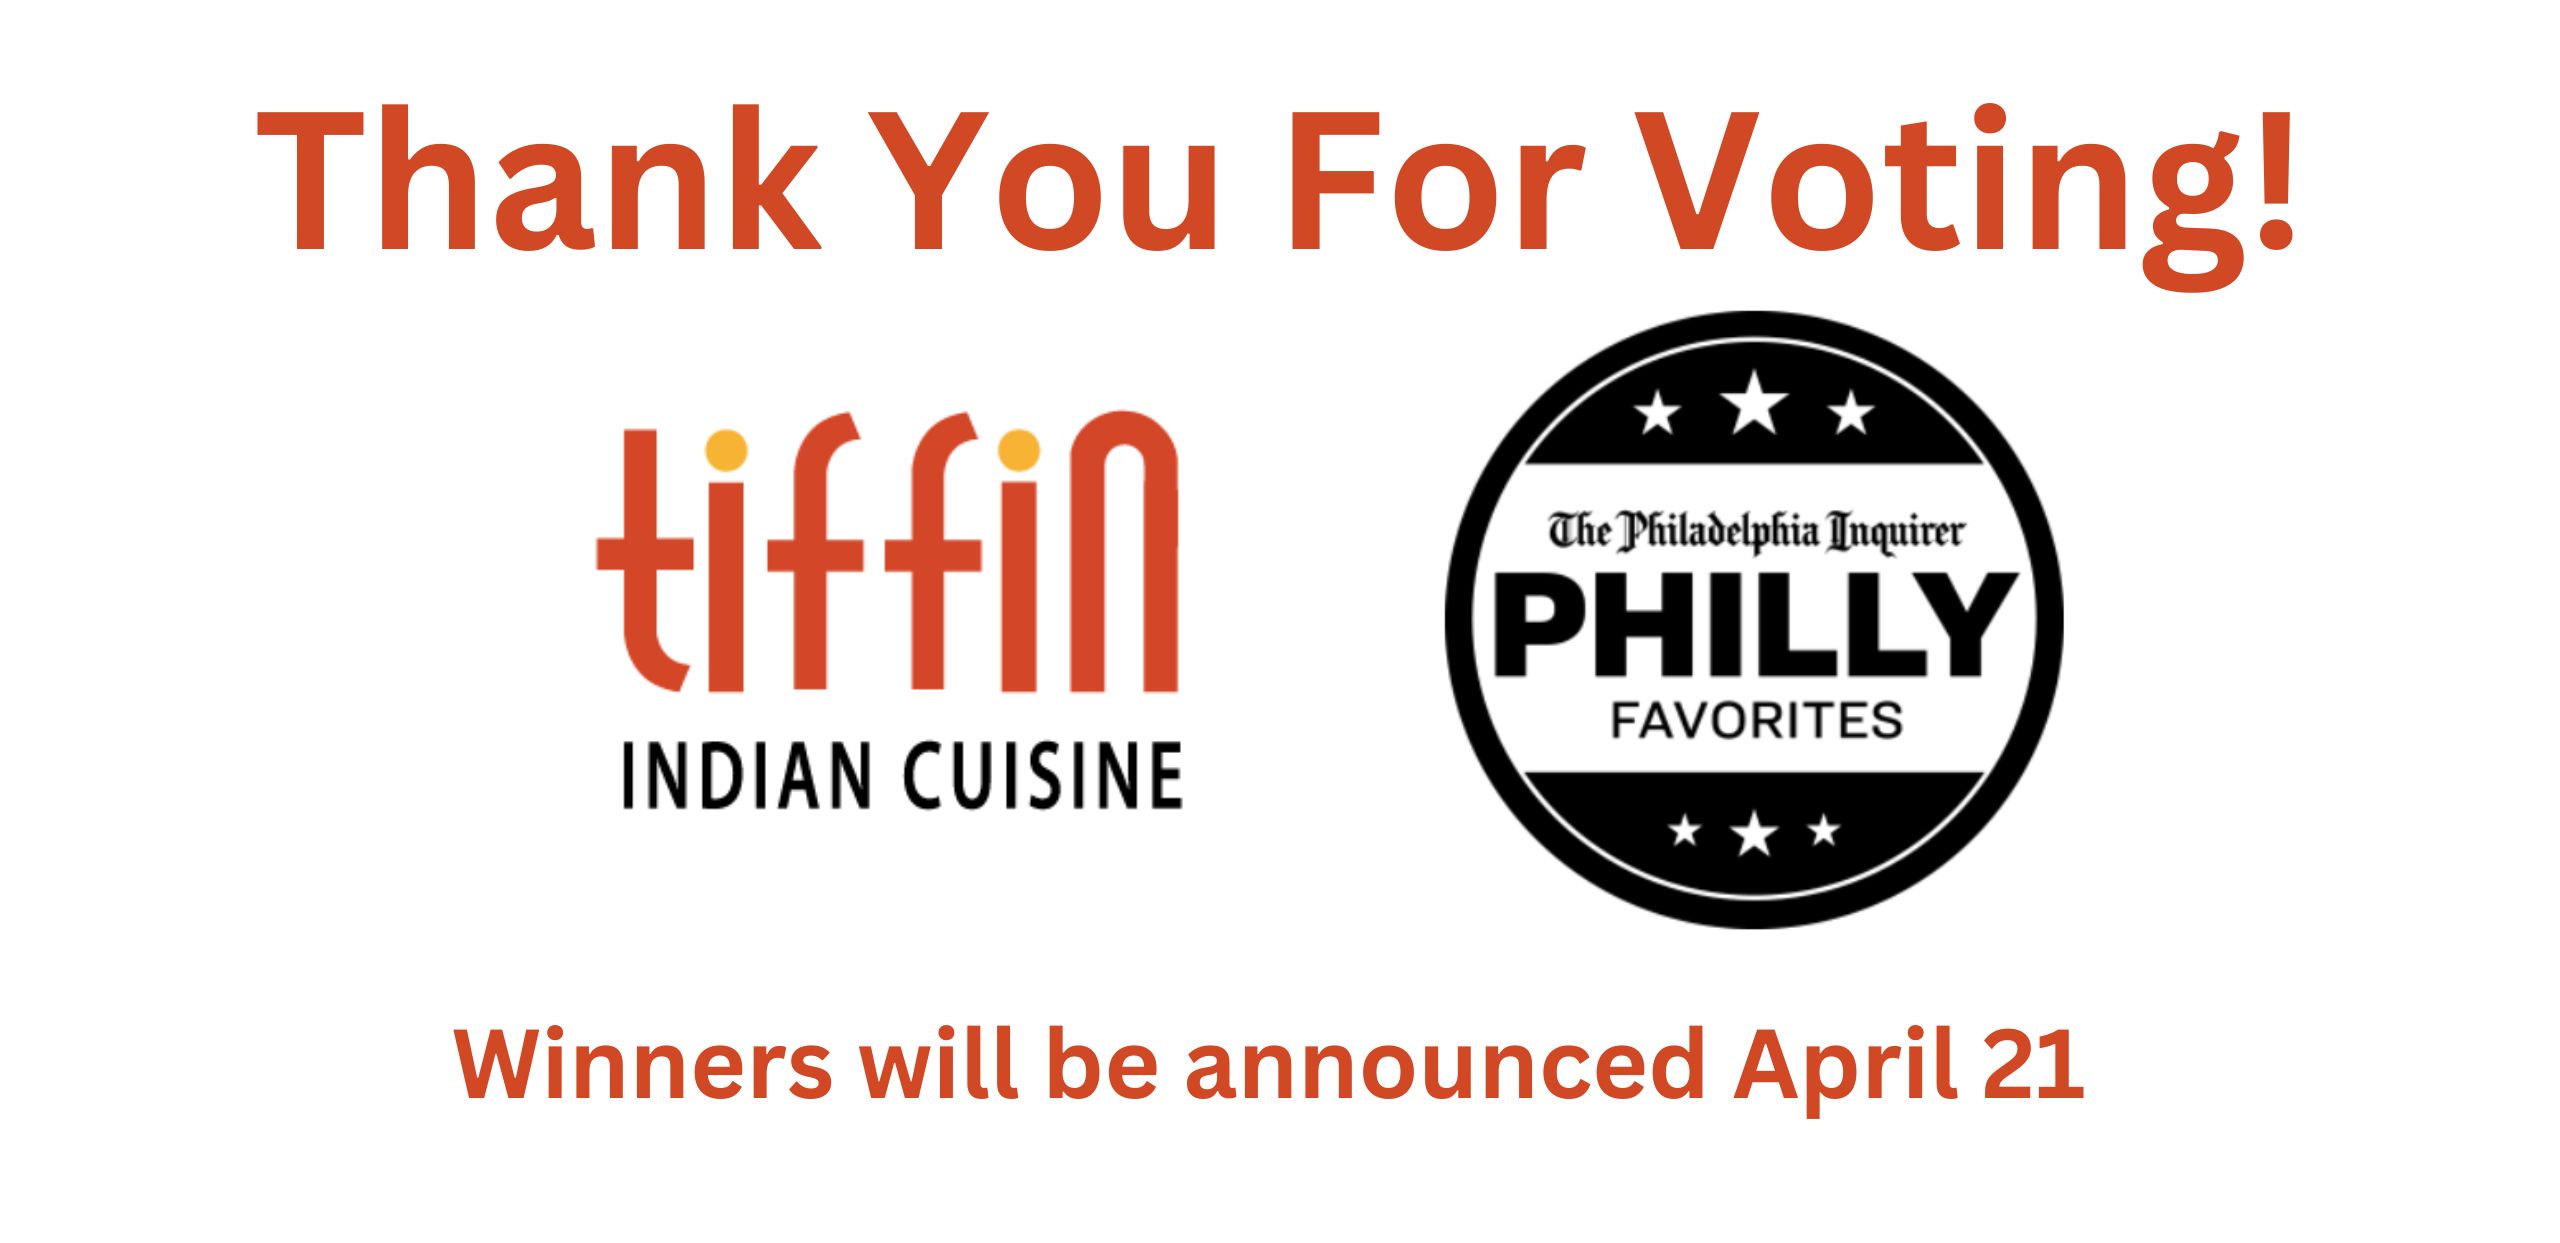 Thank you for voting tiffin Best Indian Restaurant!